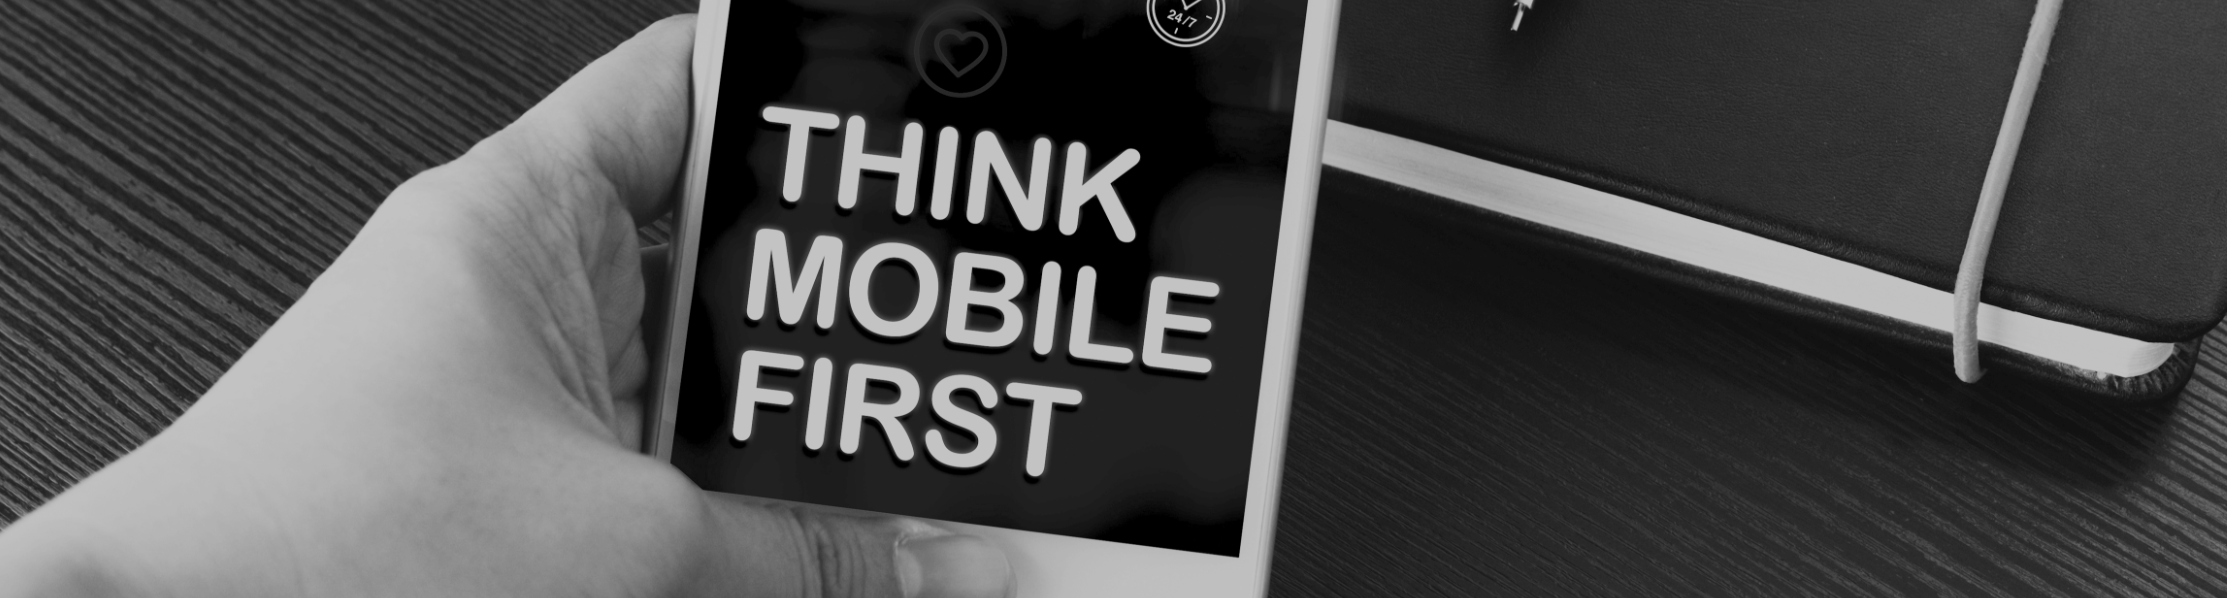 Image of a hand holding a mobile phone with the words "Think mobile first" on the screen